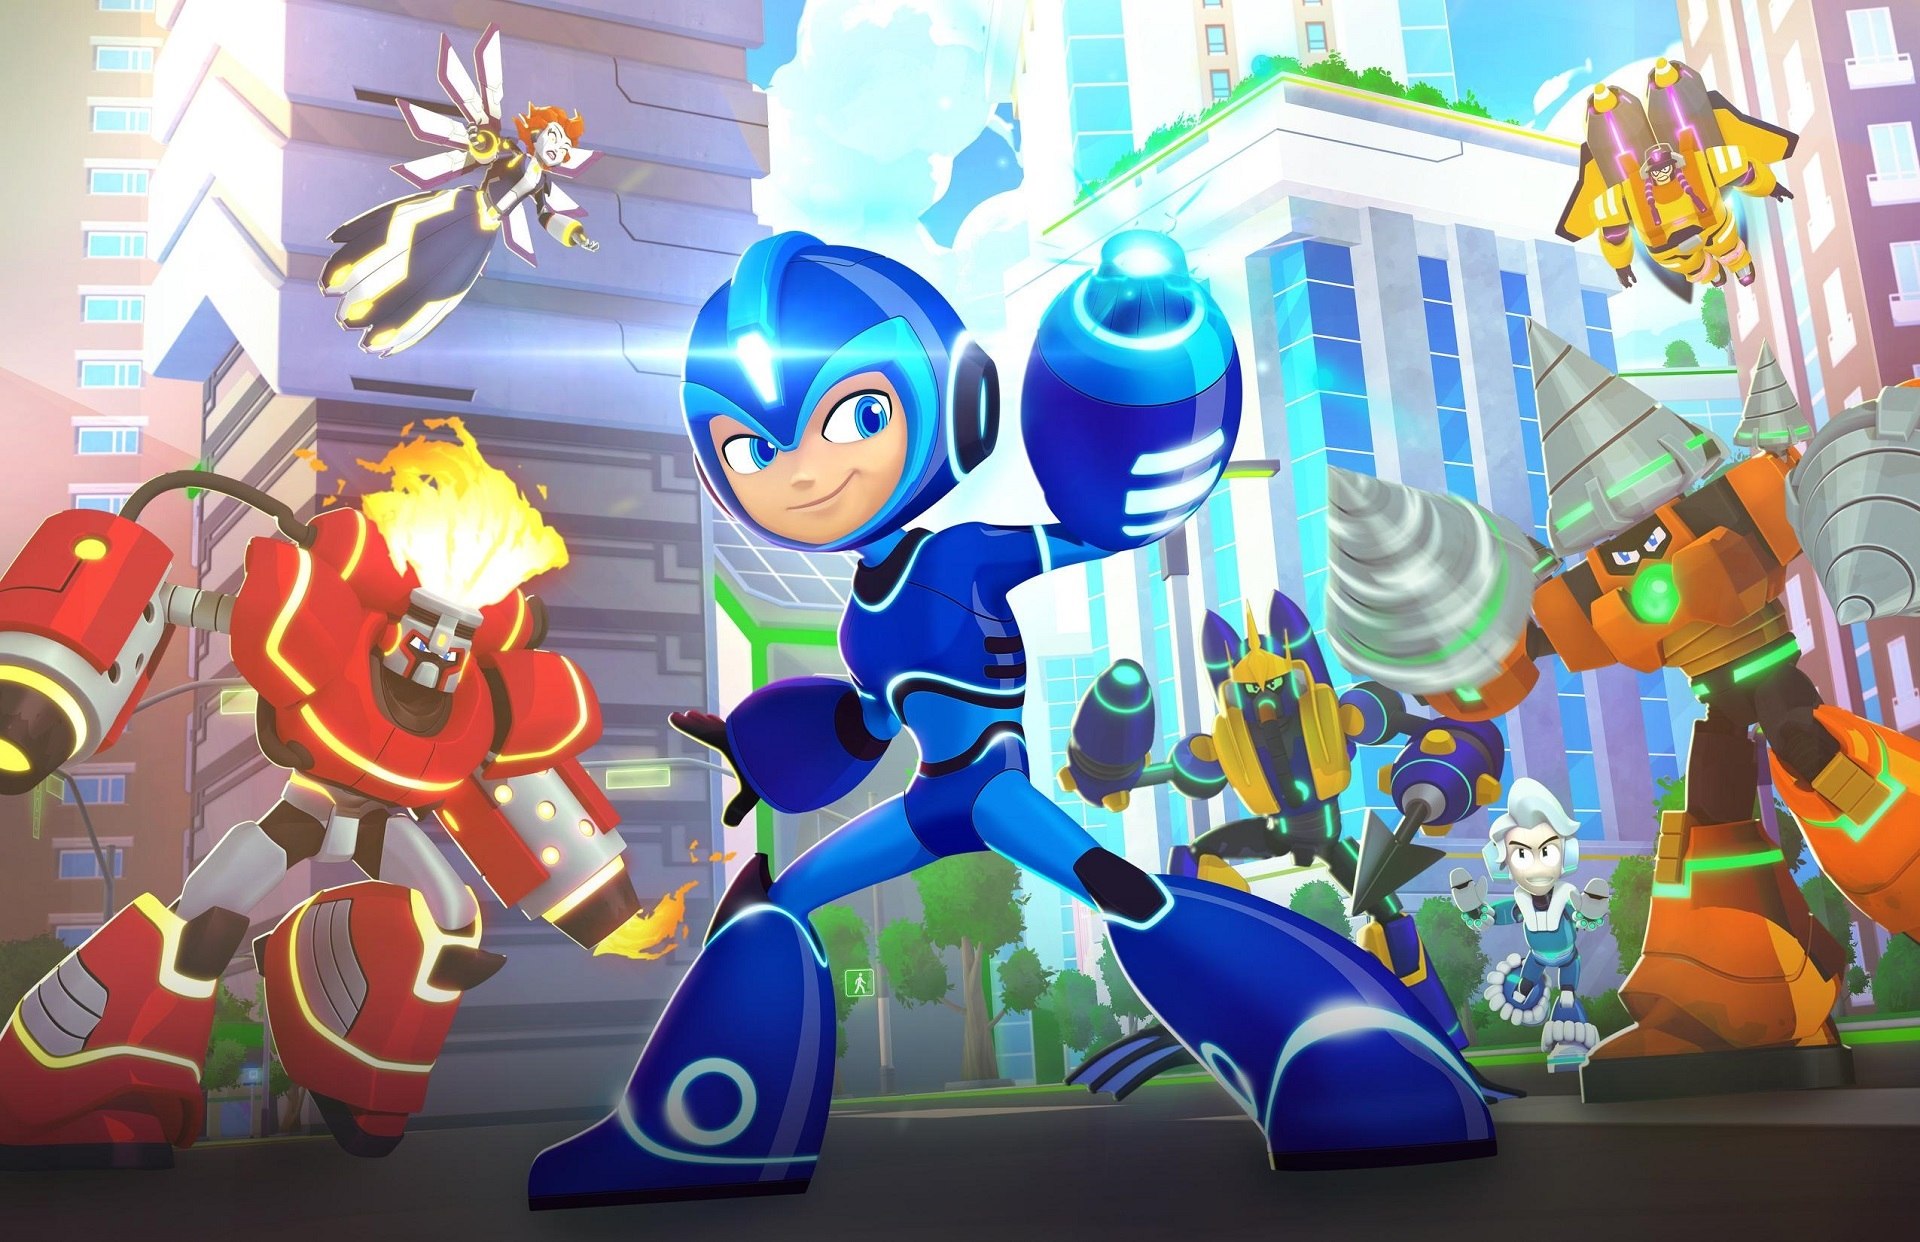 New Mega Man 11 Screenshots Confirm Touchman and New Weapon Blazing Torch